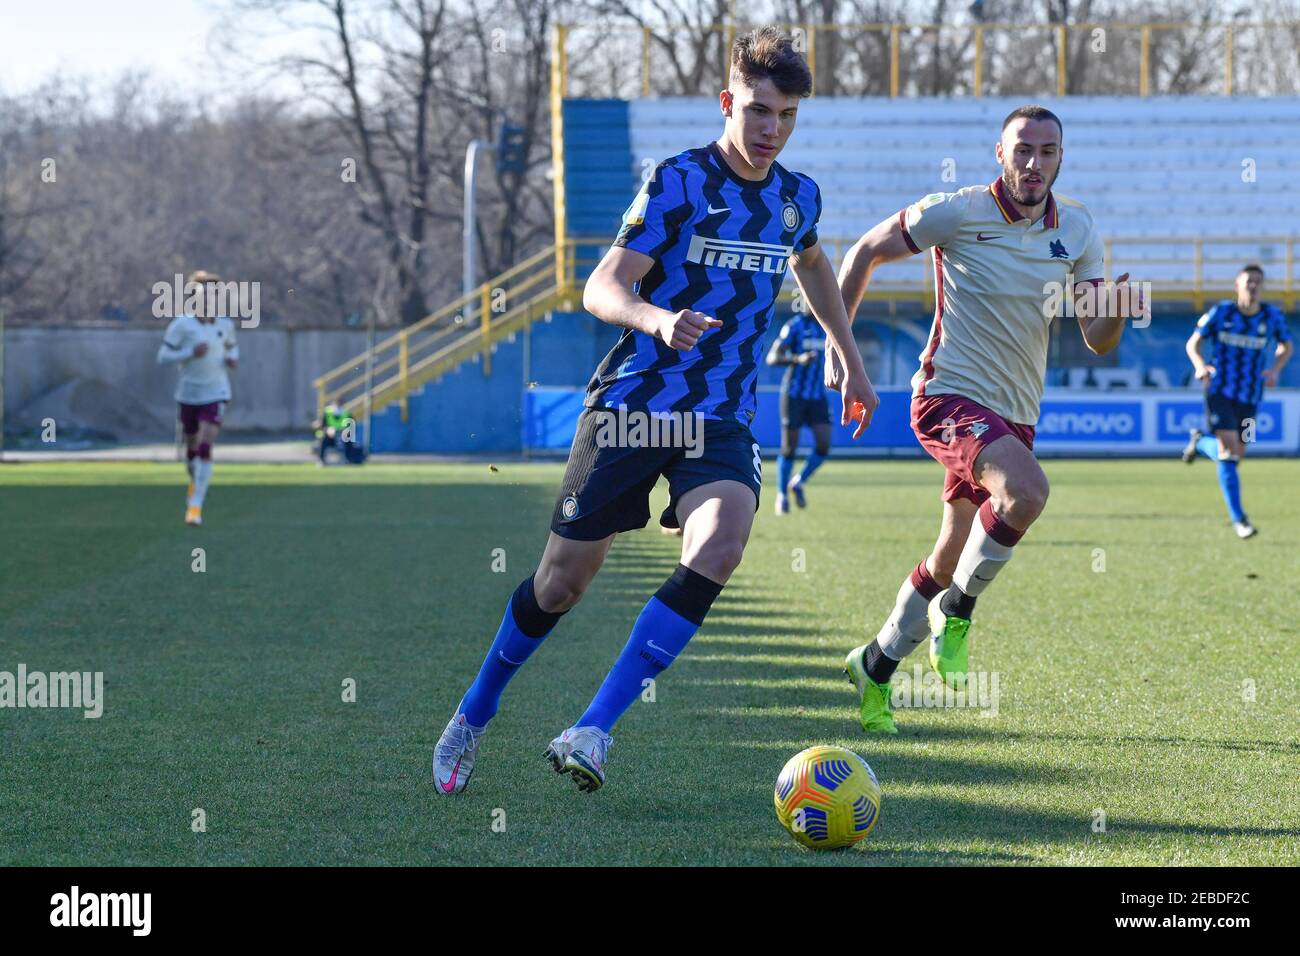 Milan, Italy. 11th, February 2021. Cesare Casadei (8) of Inter U-19 seen  during the Campionato Primavera 1 match between Inter and Roma at the  Suning Youth Development Centre, Milan. (Photo credit: Gonzales